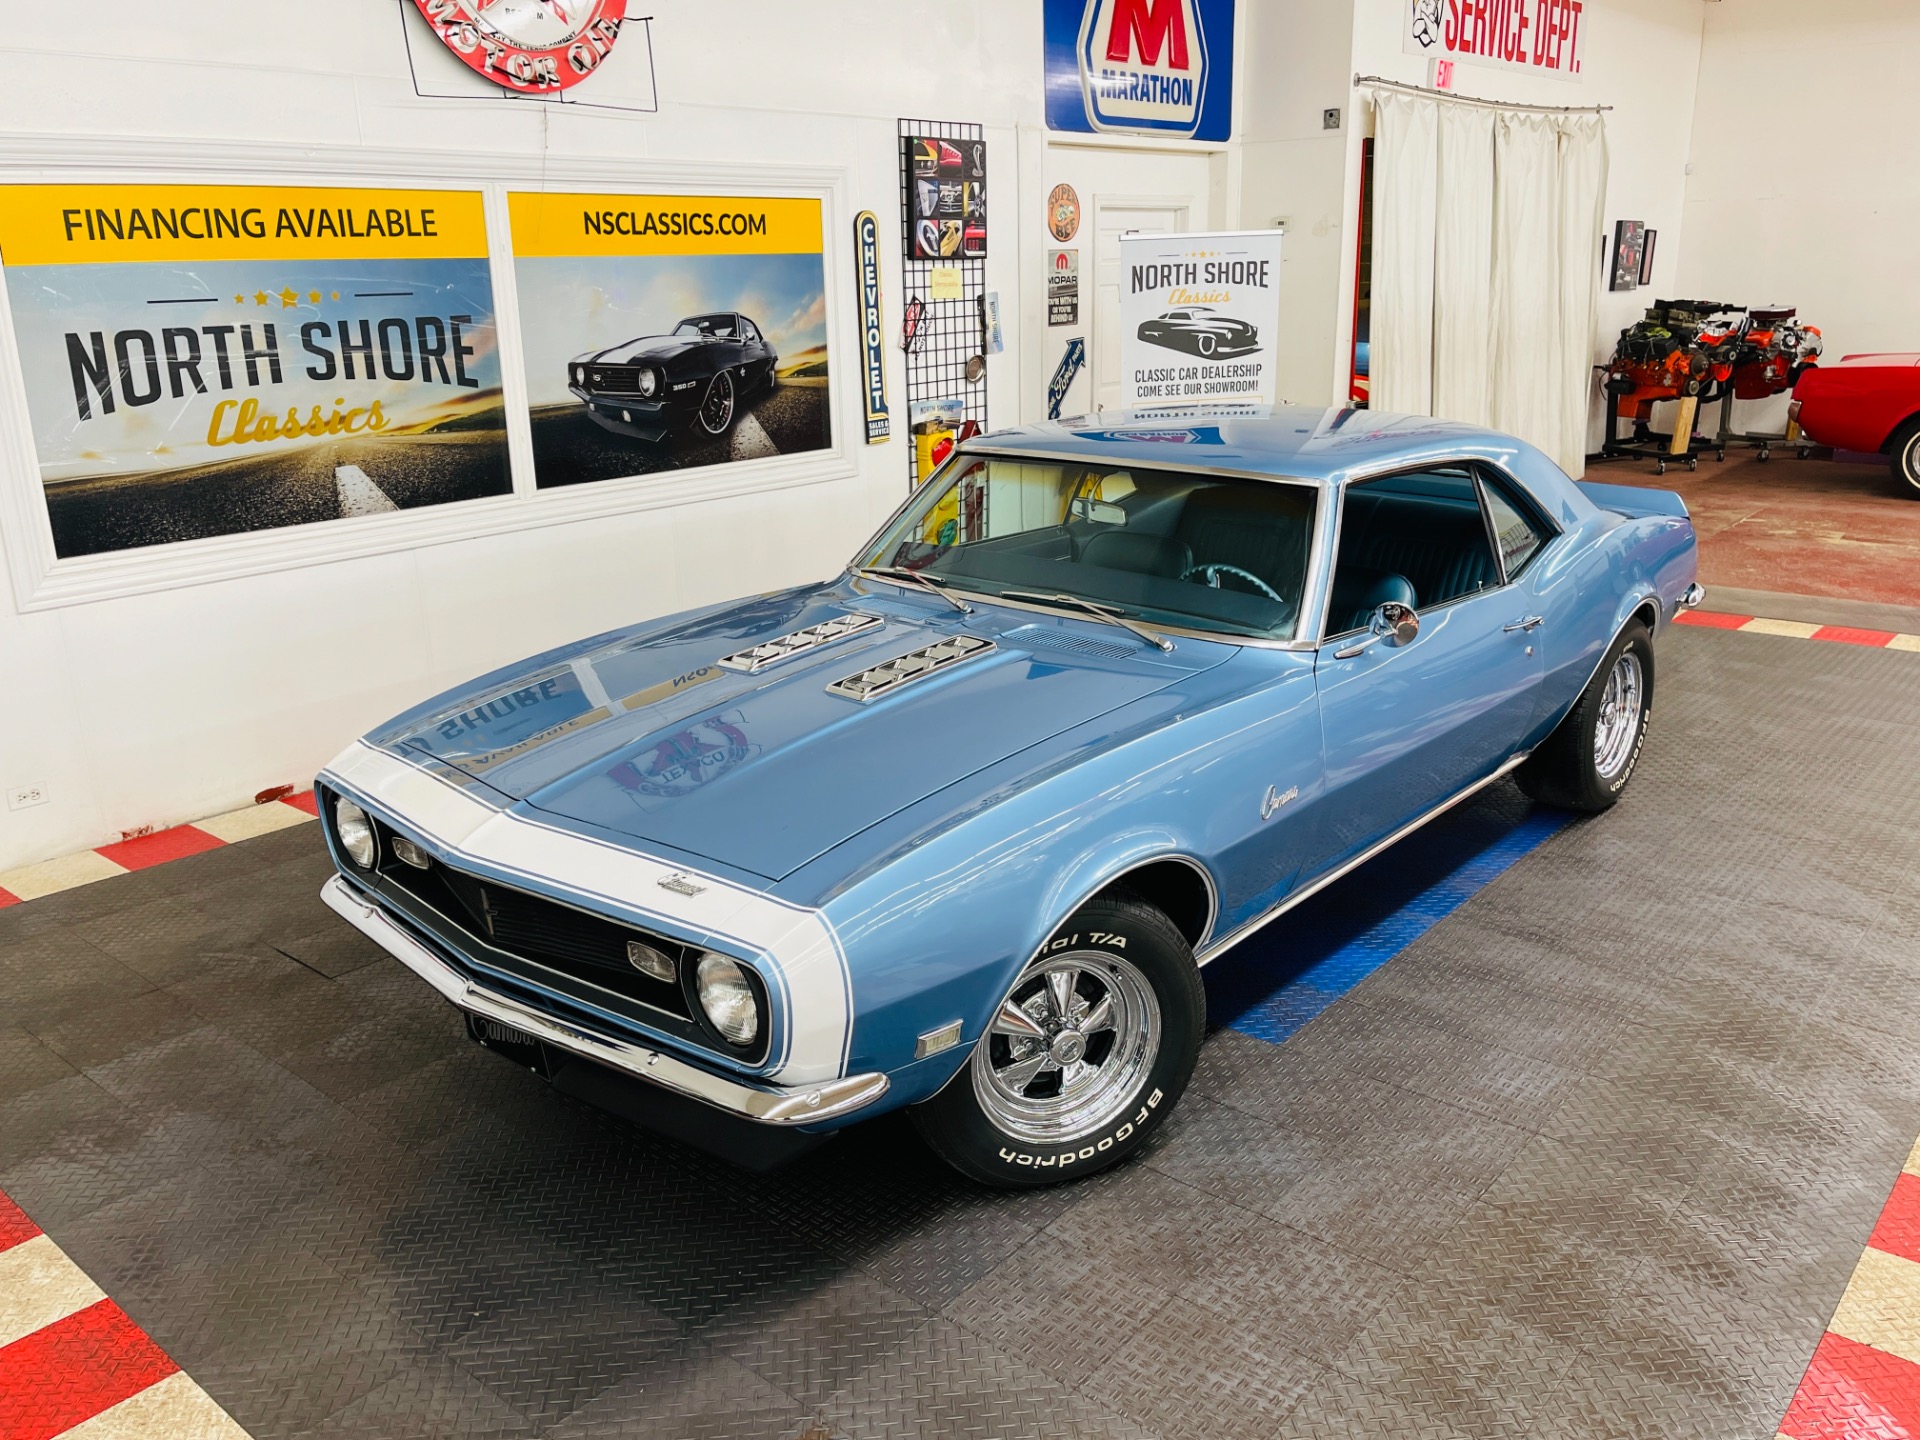 Used 1968 Chevrolet Camaro 327 Engine Grotto Blue See Video For